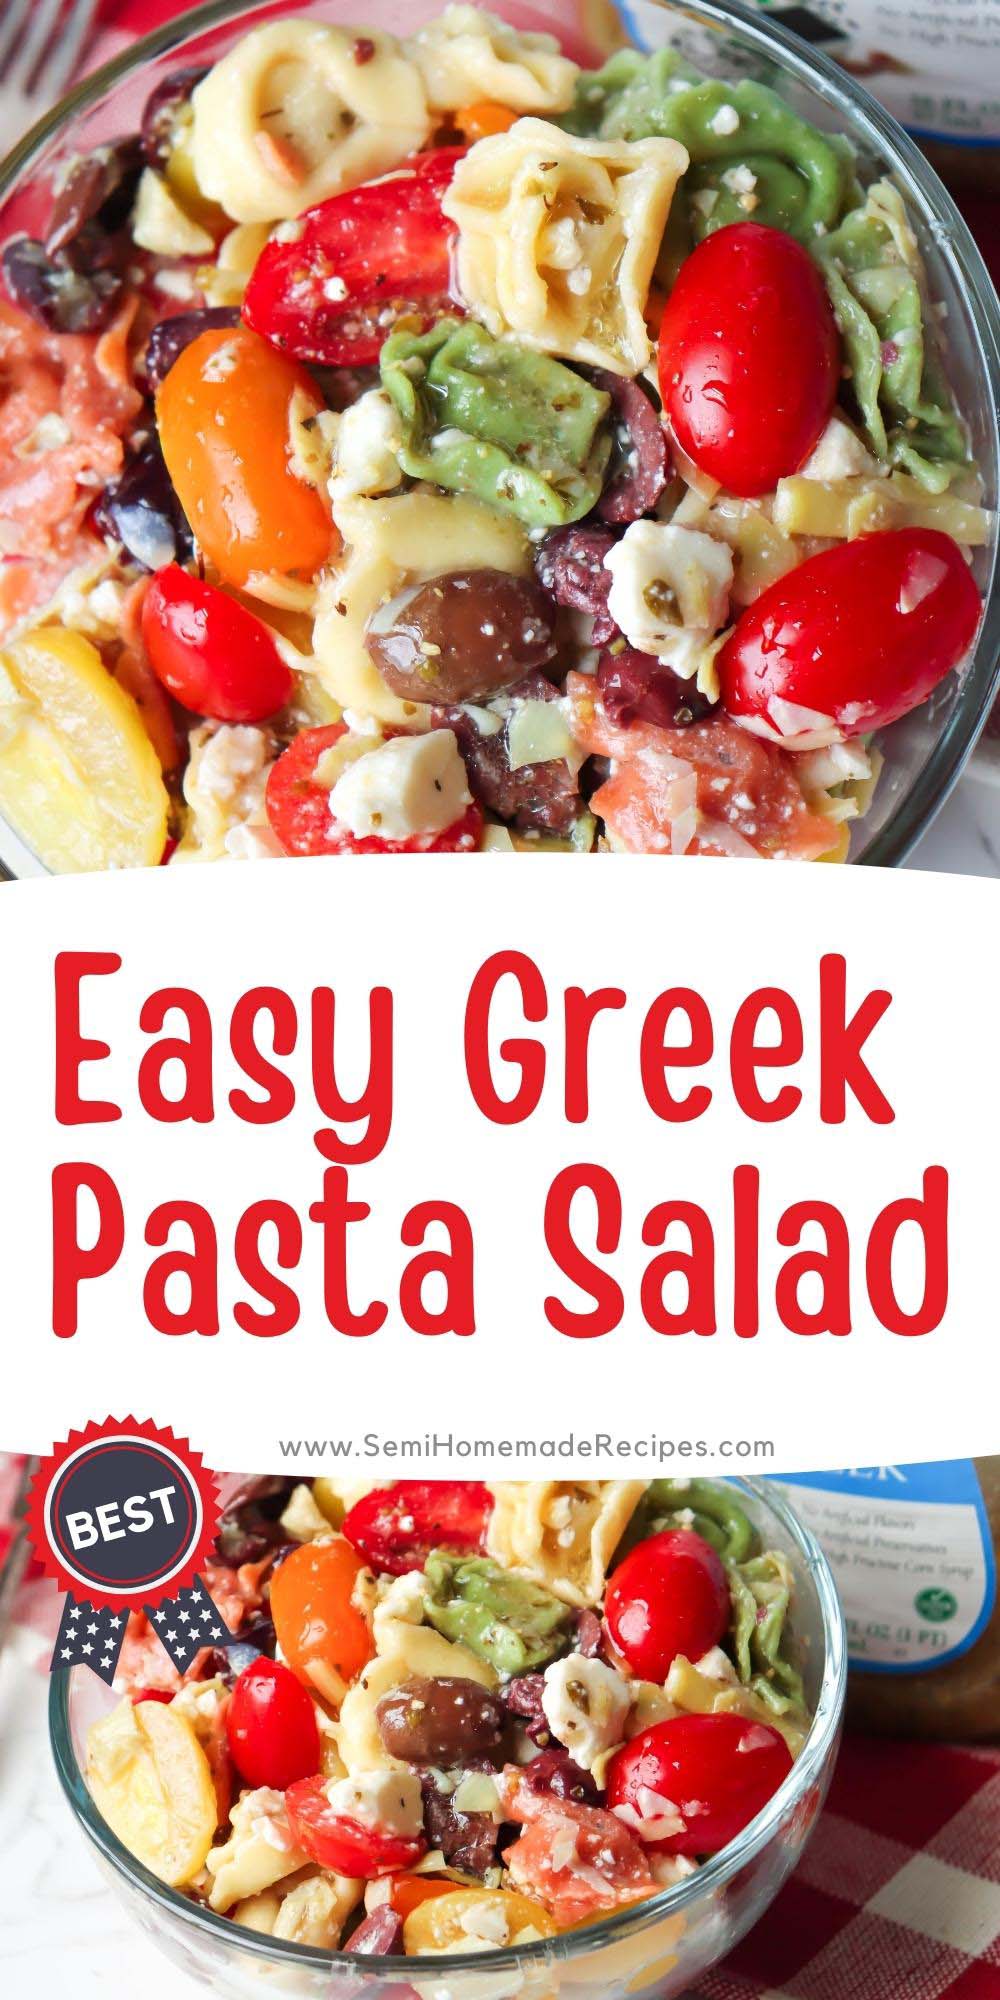 Greek Pasta salad is so easy to make and the perfect make ahead side dish! Cheese tortellini is tossed together with artichoke hearts, kalamata olives, garlic, tomatoes and feta before being mixed with Greek salad dressing for a tasty and simple recipe! Great for a cookout or as side dish for a BBQ! 